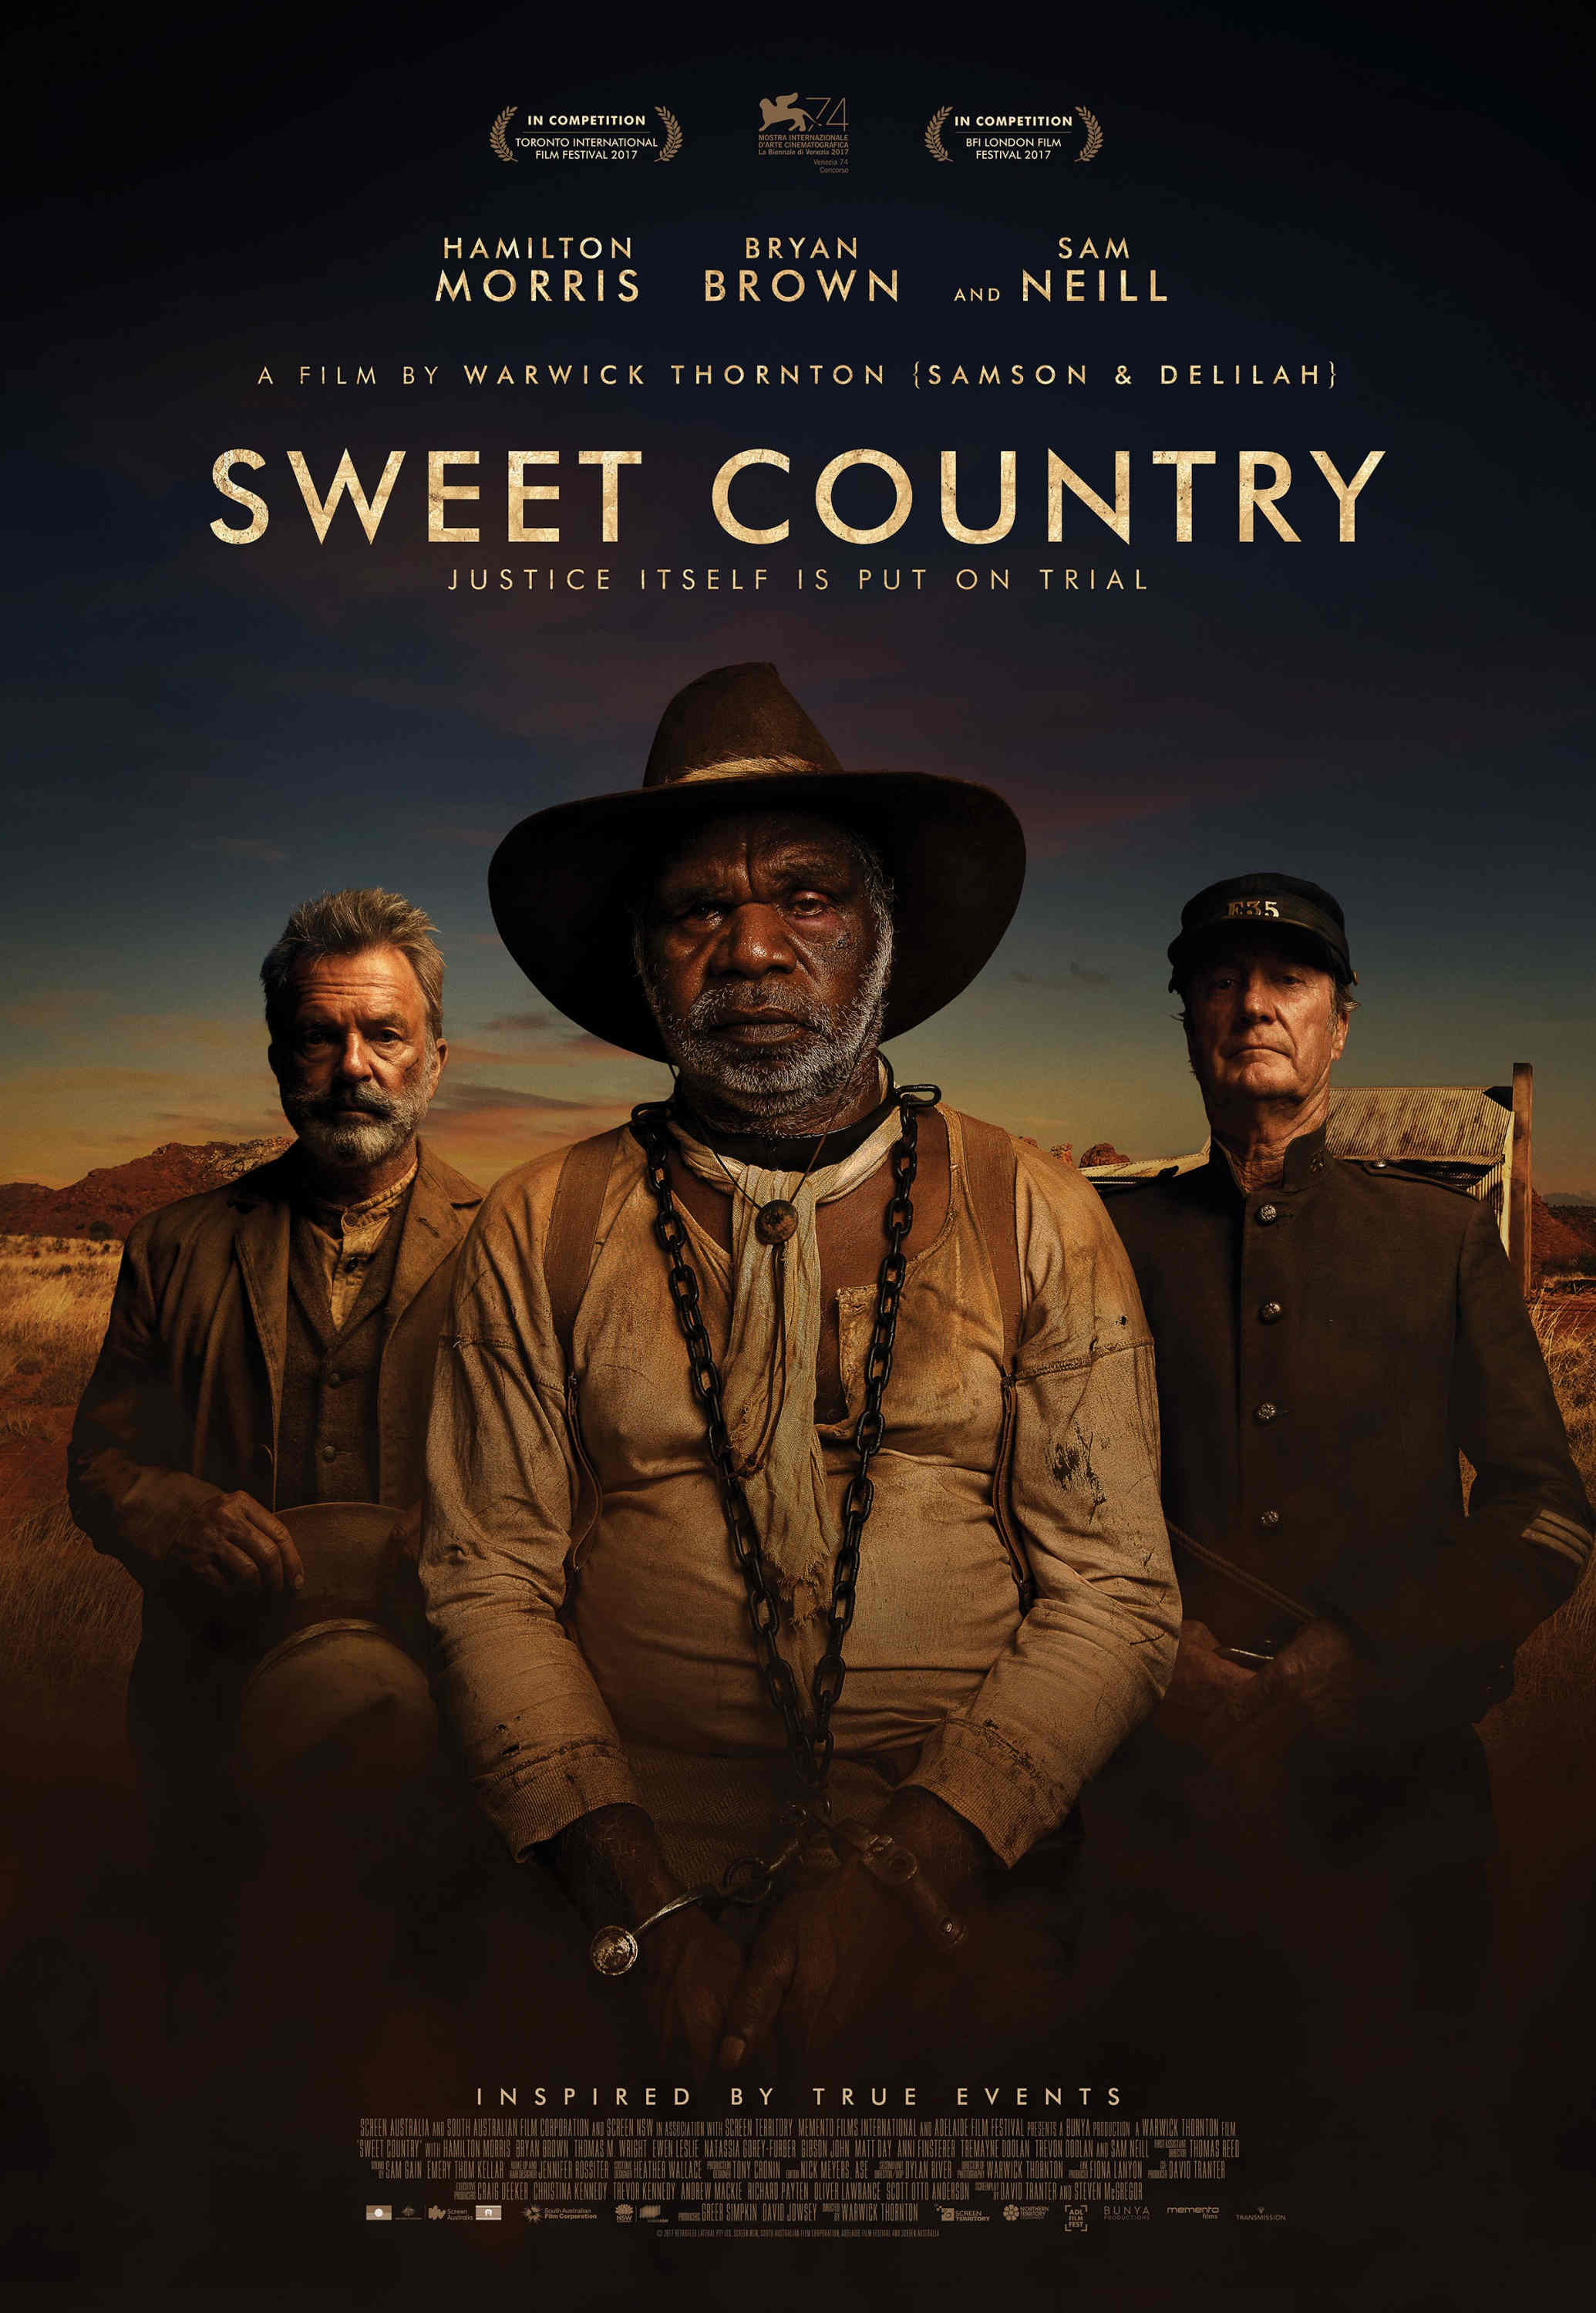 Sweet Country (2017) ★★★★☆